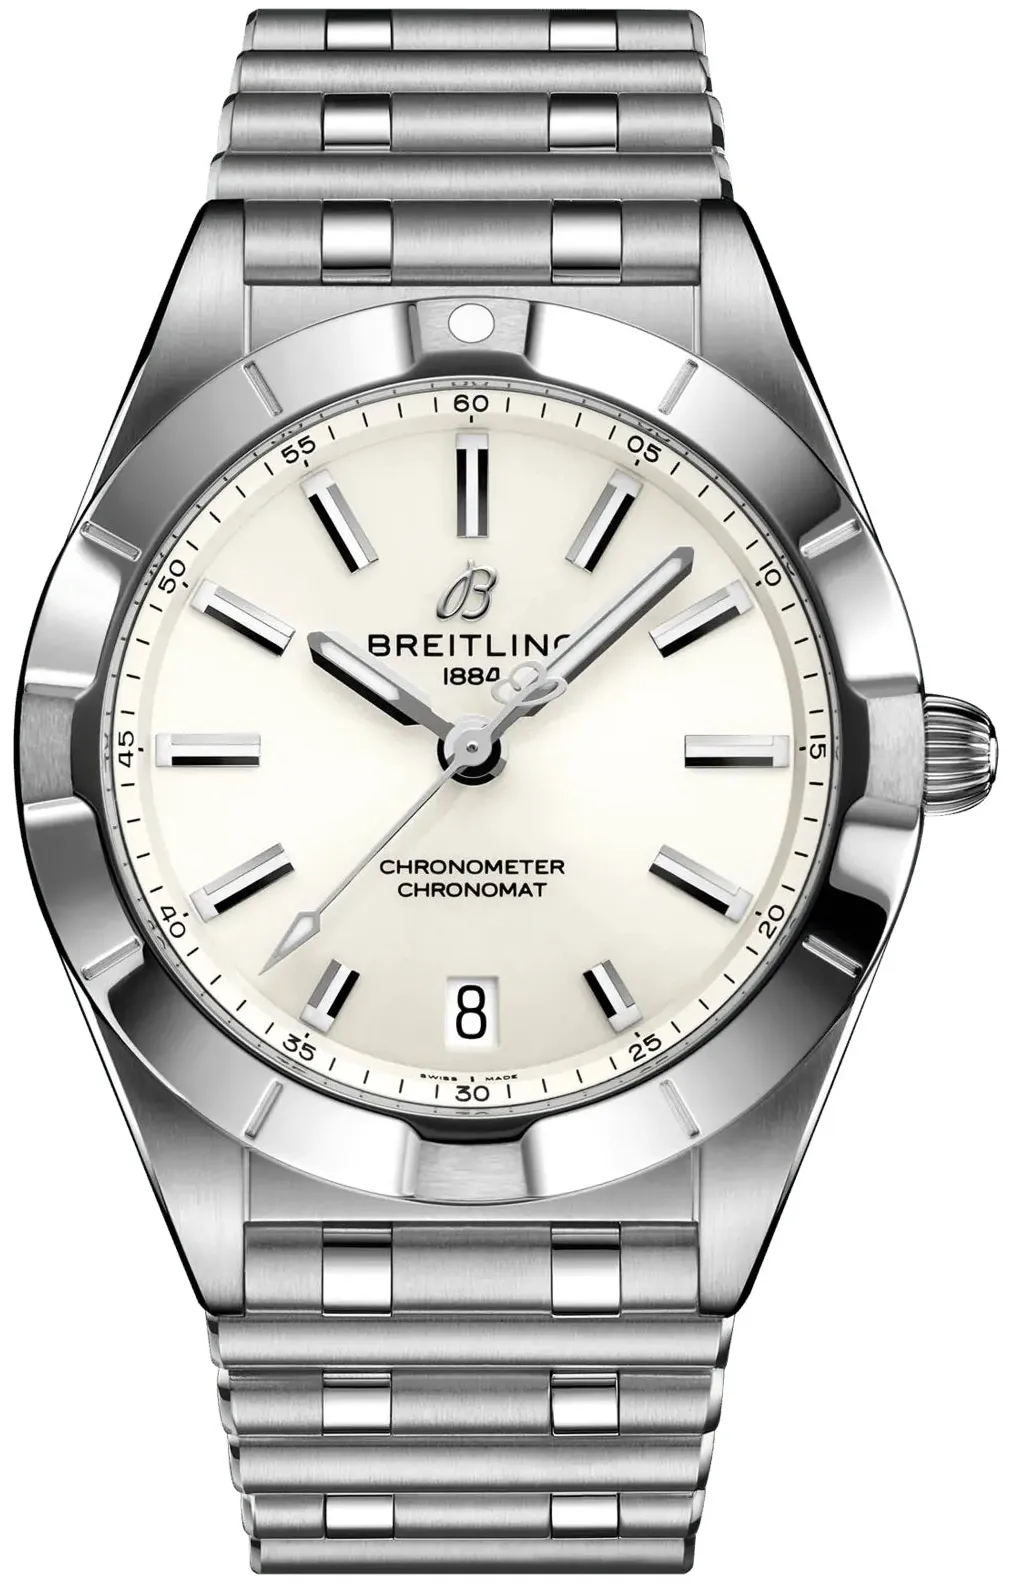 Breitling Chronomat A77310101A2A1 32mm Stainless steel White